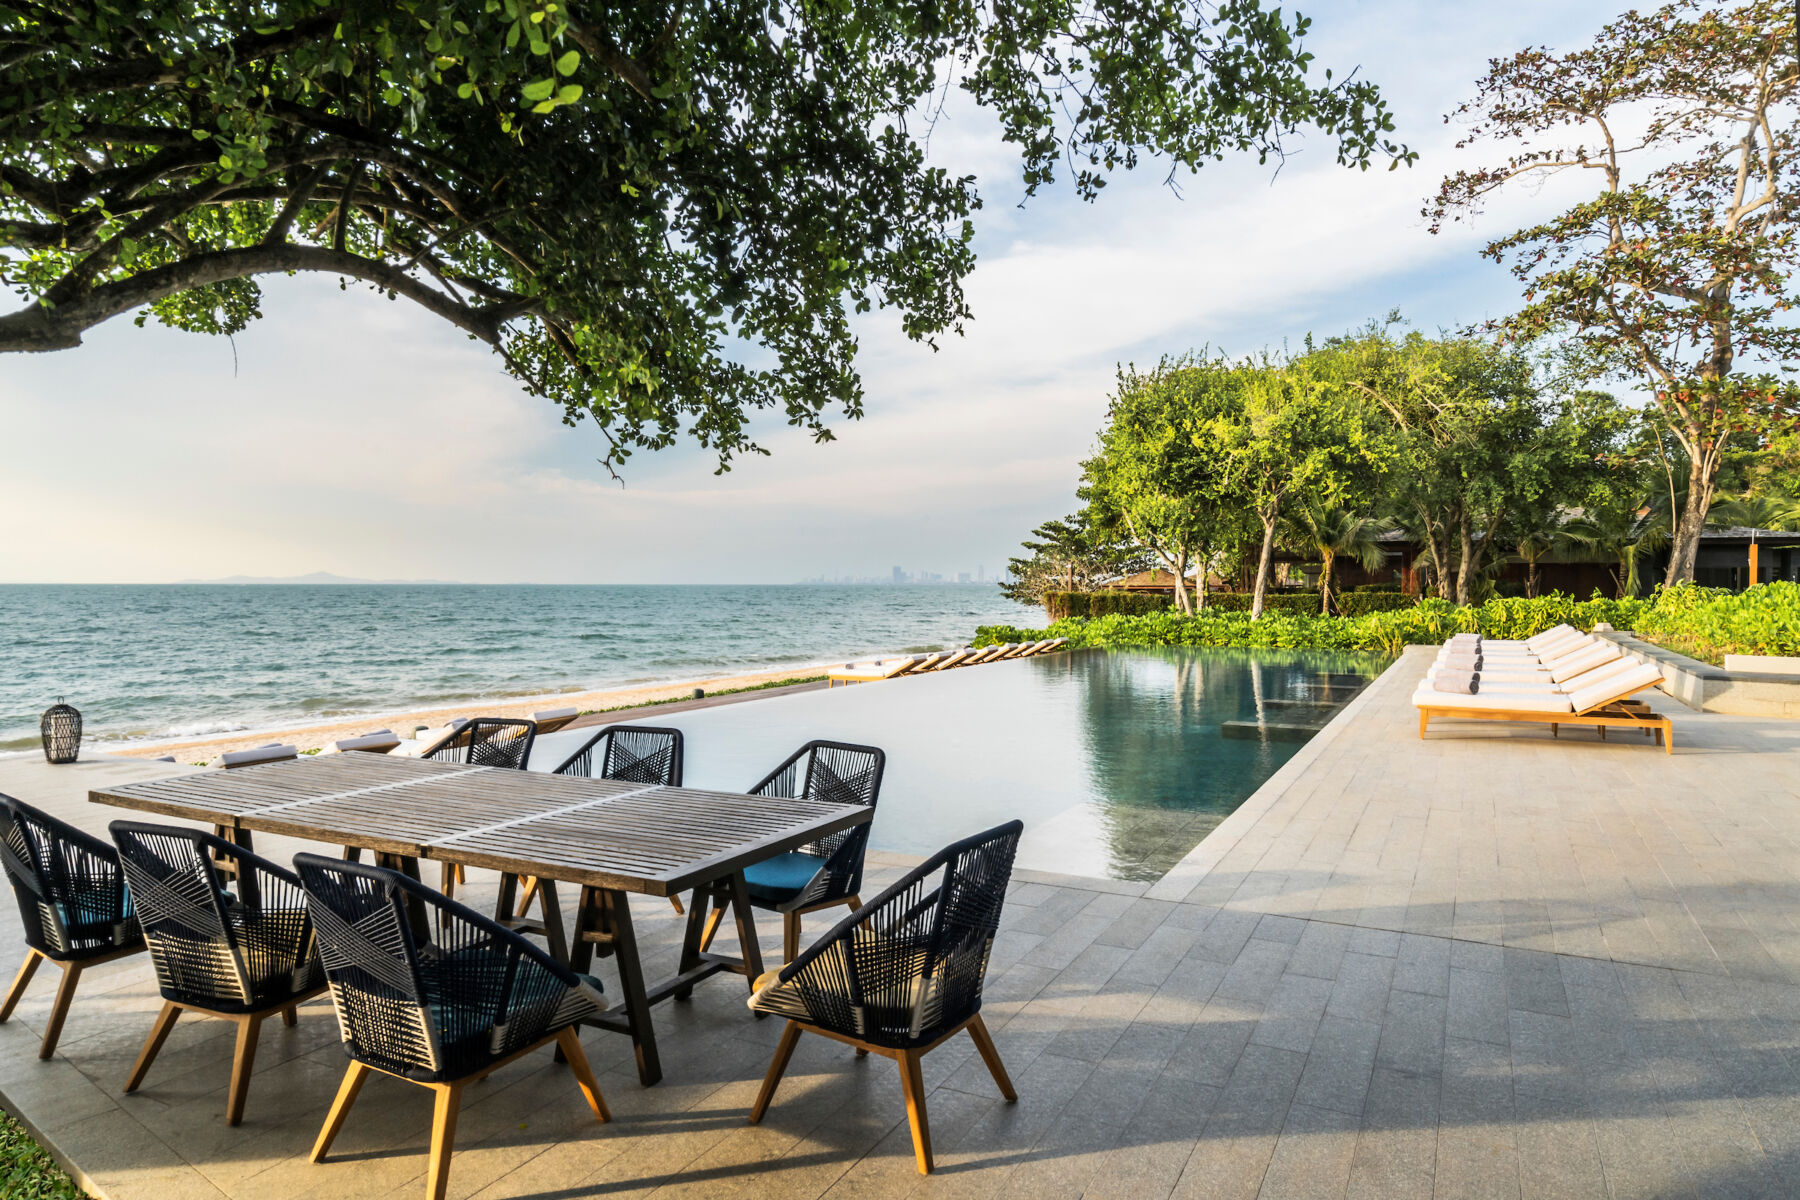 Andaz brand debuts in Thailand with the opening of Andaz Pattaya jomtien beach | News by Thaiger